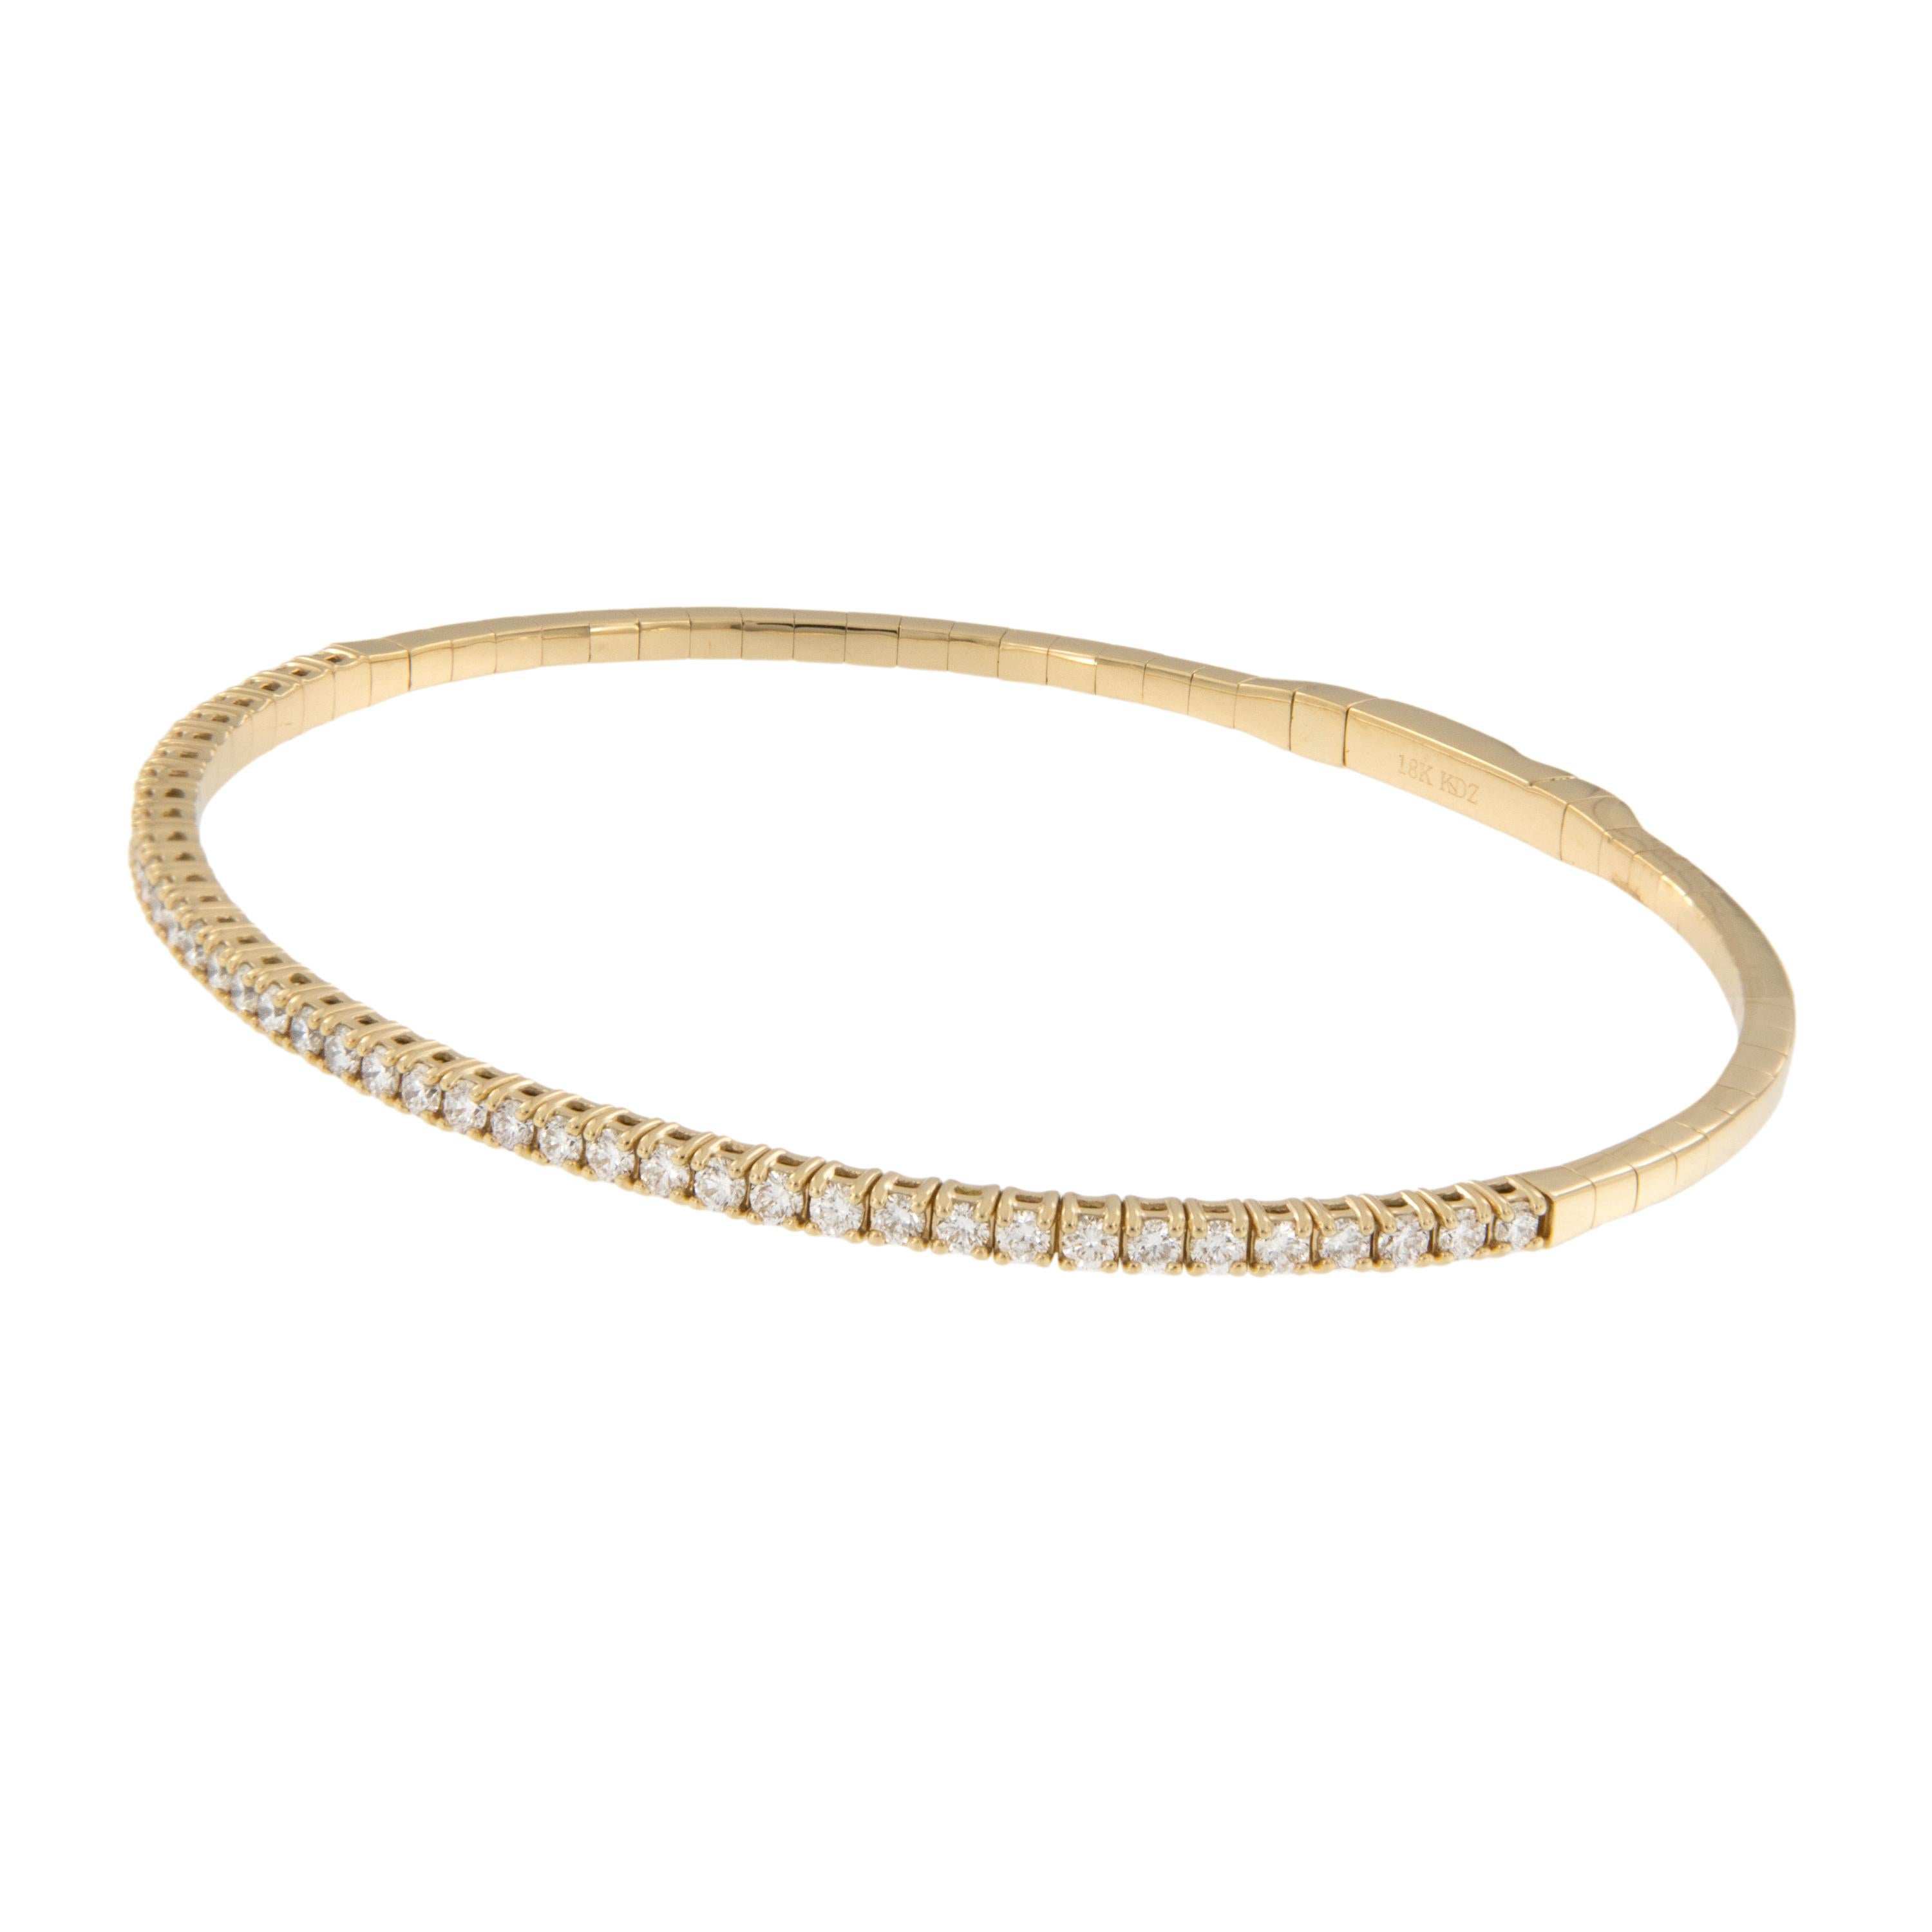 Worn on its own or stacked with other bangles, this piece is a staple in any jewelry collection. Made from fine 18 karat yellow gold and flexible set with 41 RBC diamonds = 1.00 Cttw of VS, F-G quality this bracelet will feel just at home on your